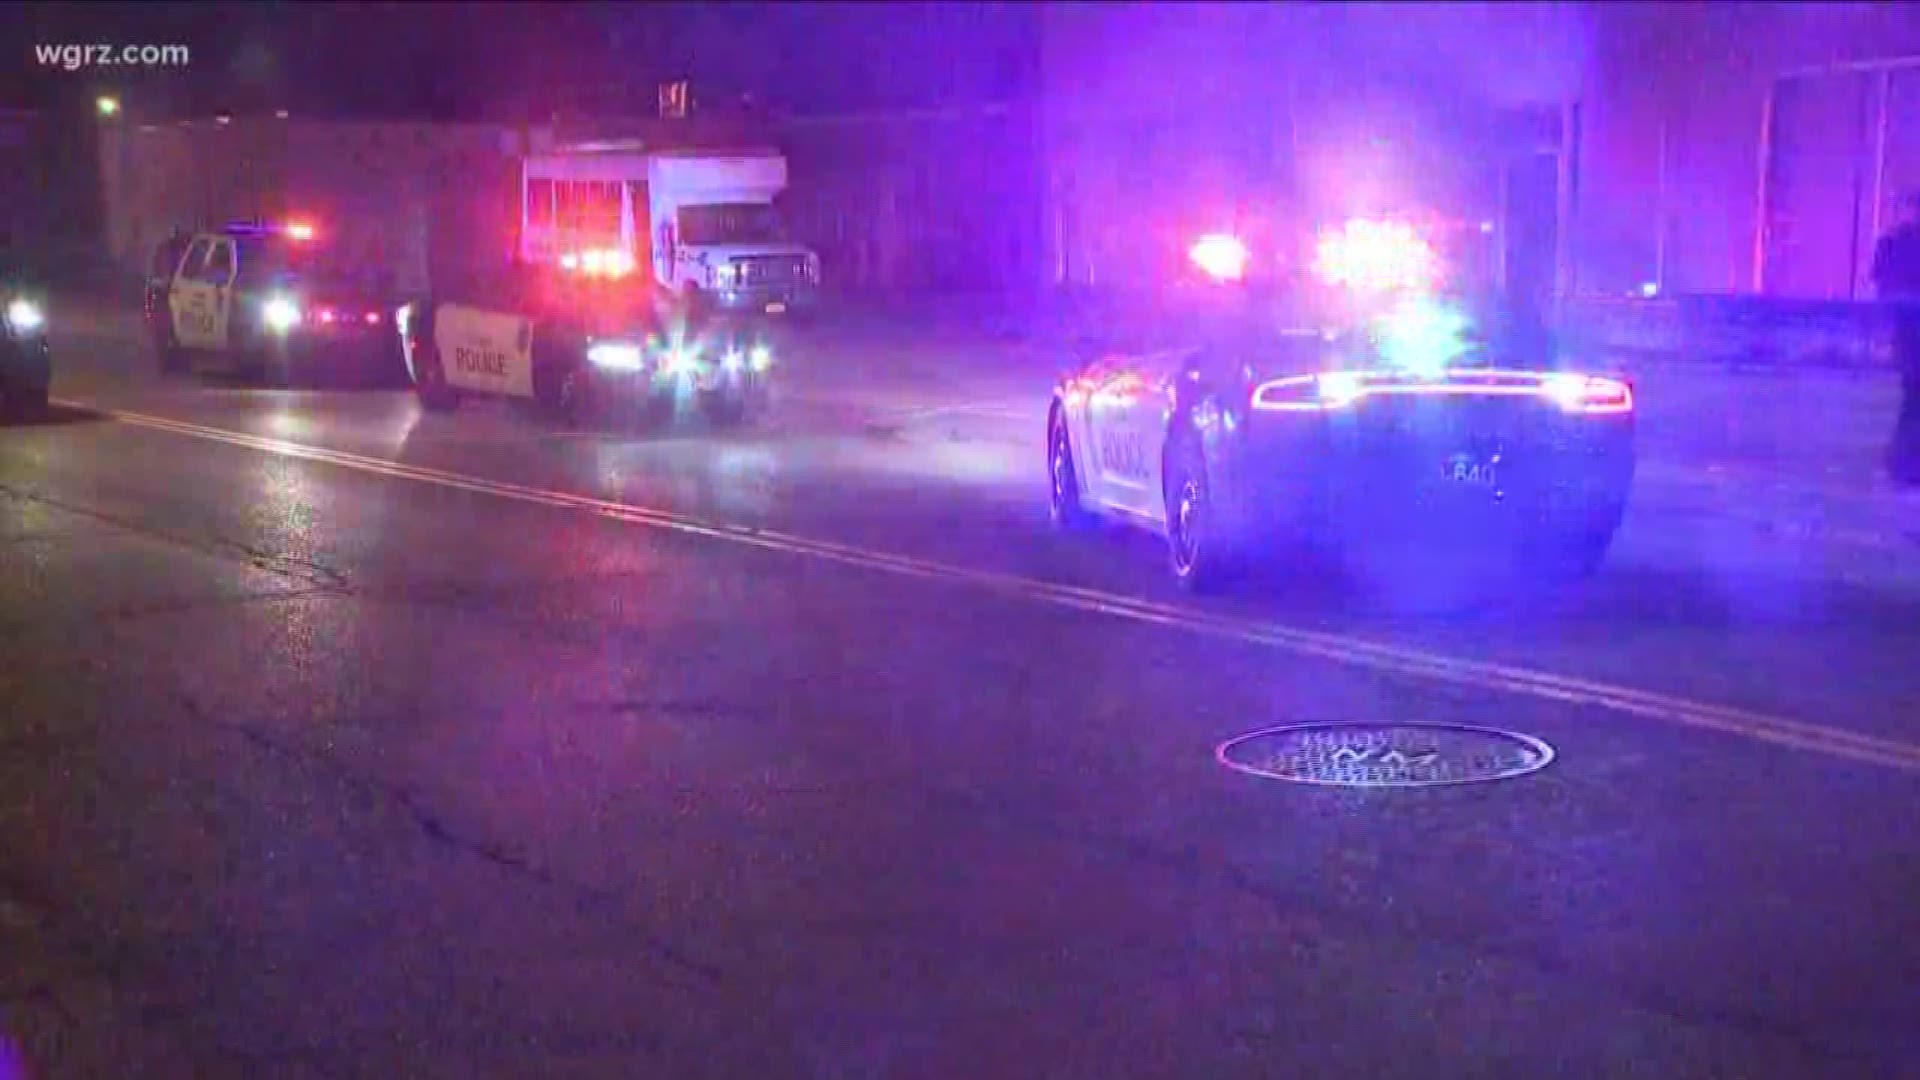 Buffalo Police responded to a reported shooting on Kenmore Avenue early Wednesday morning.